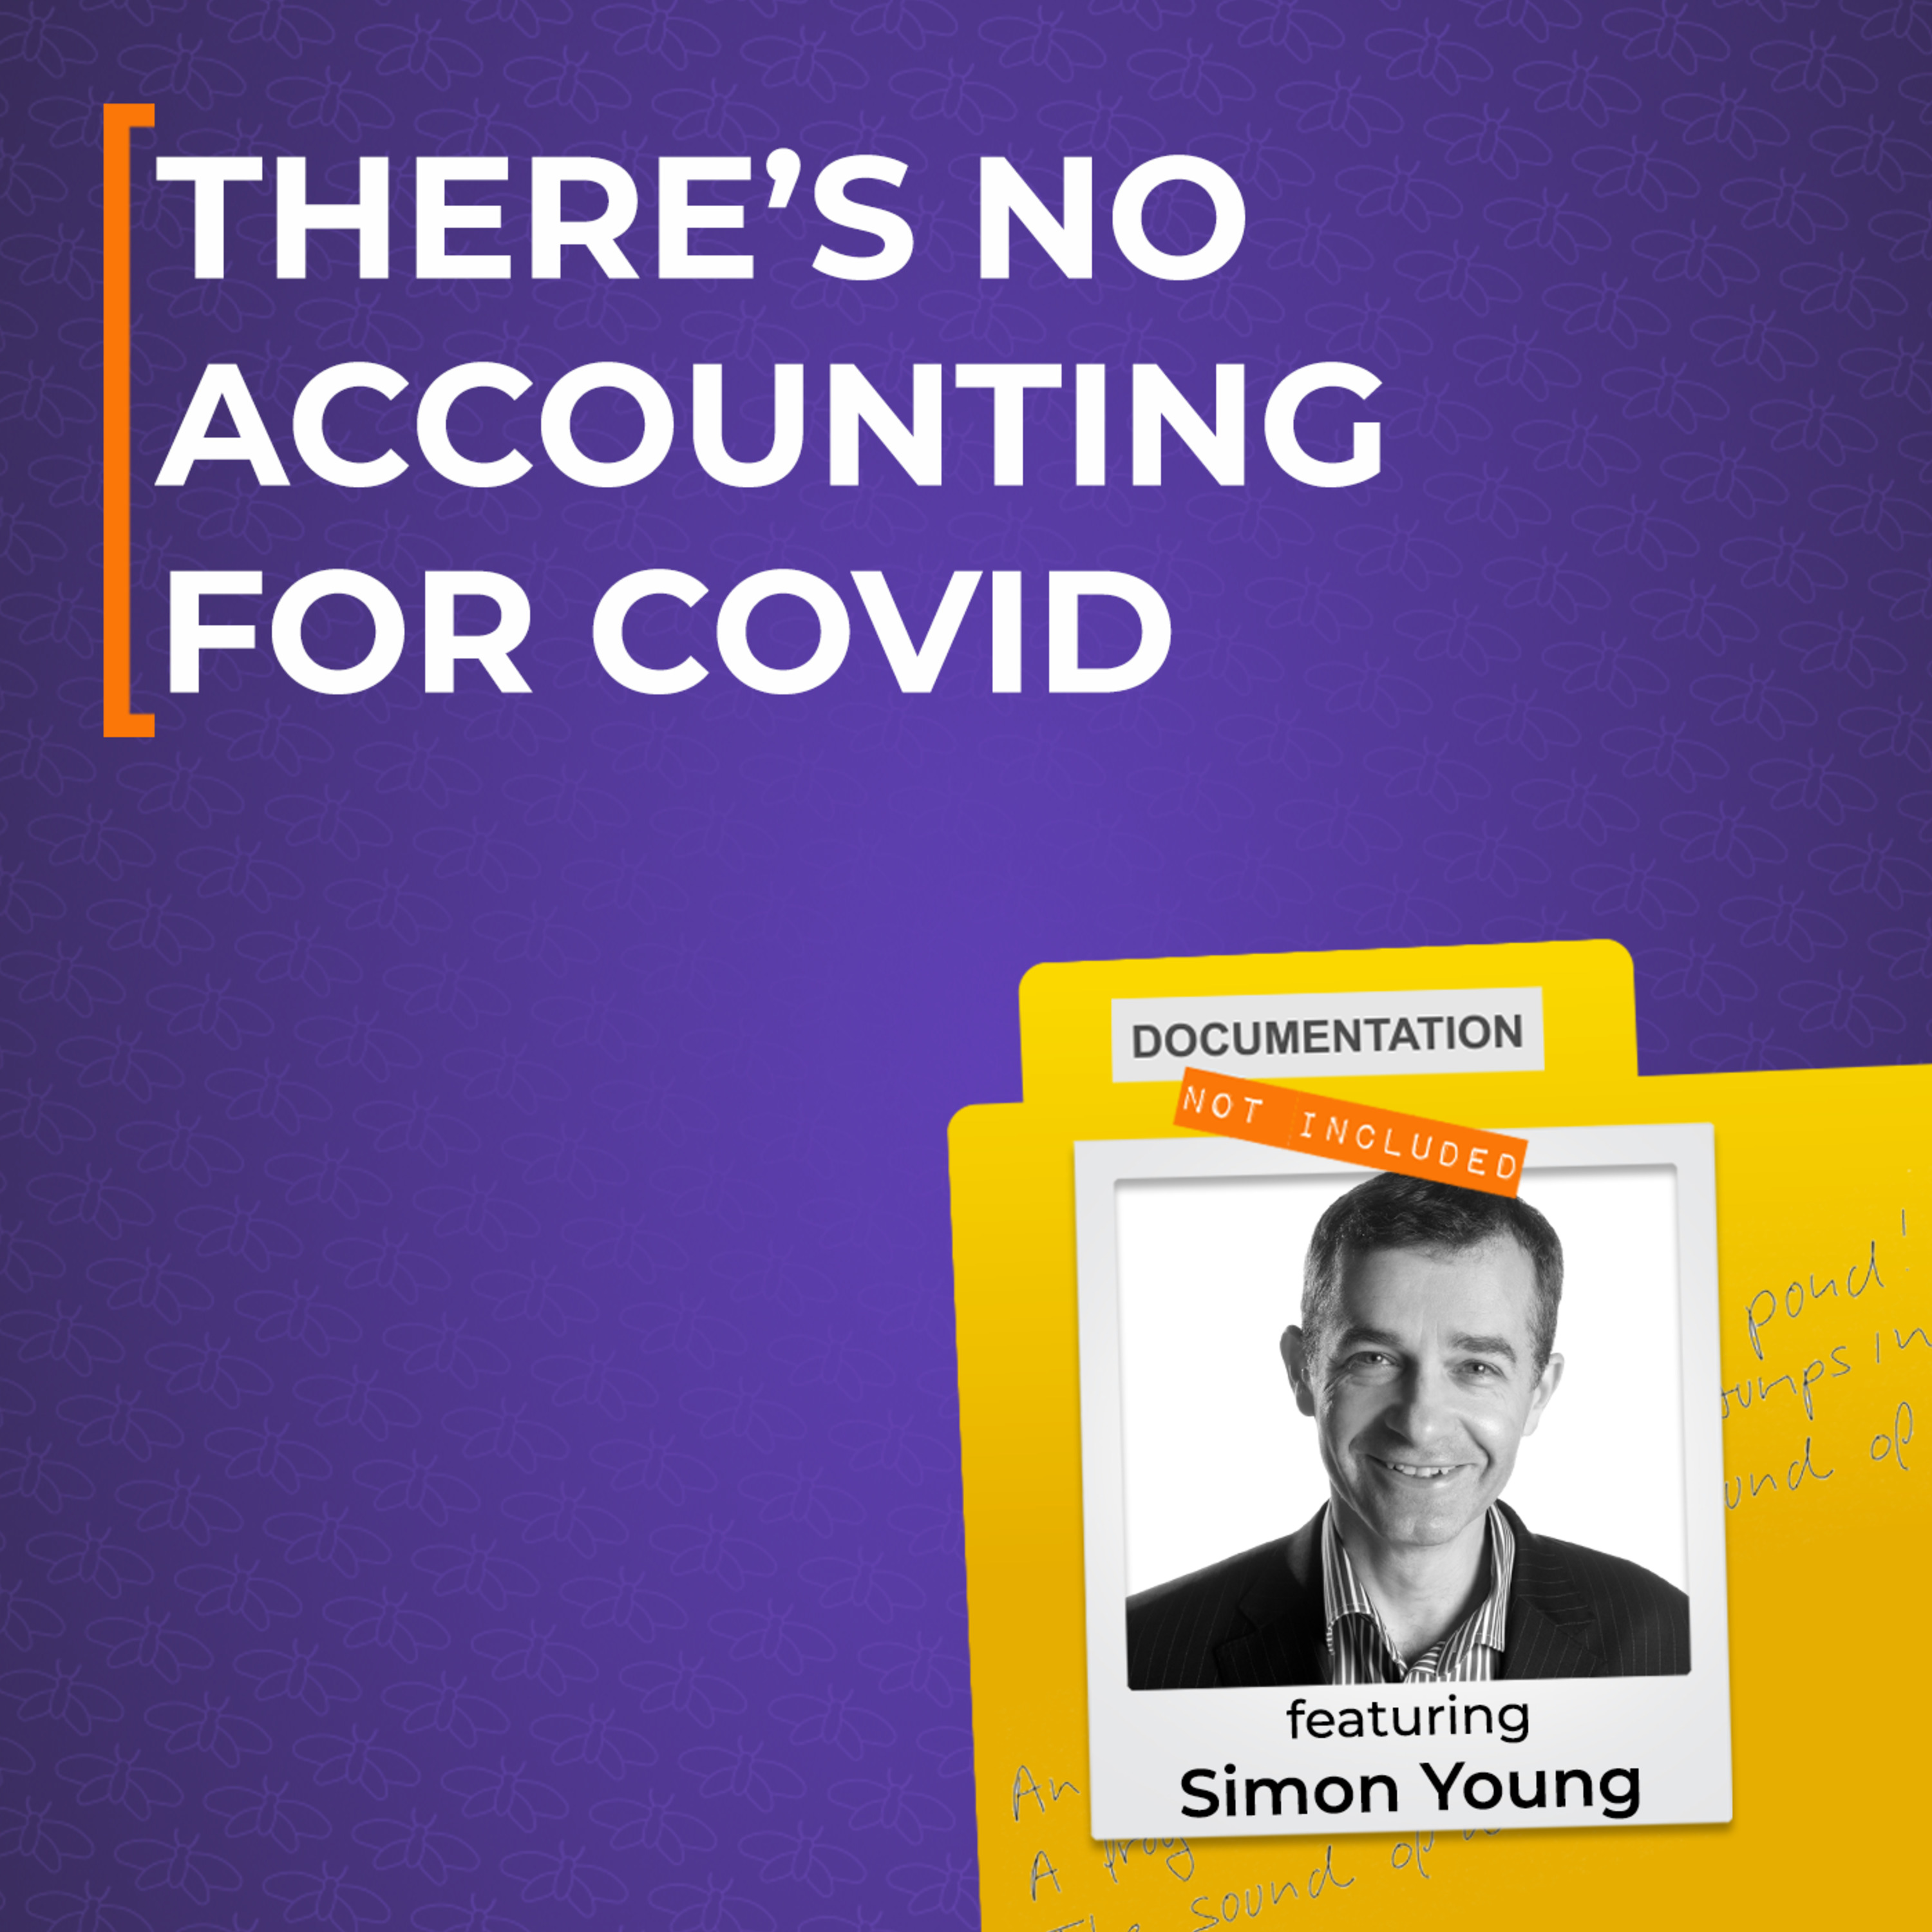 There's No Accounting for COVID